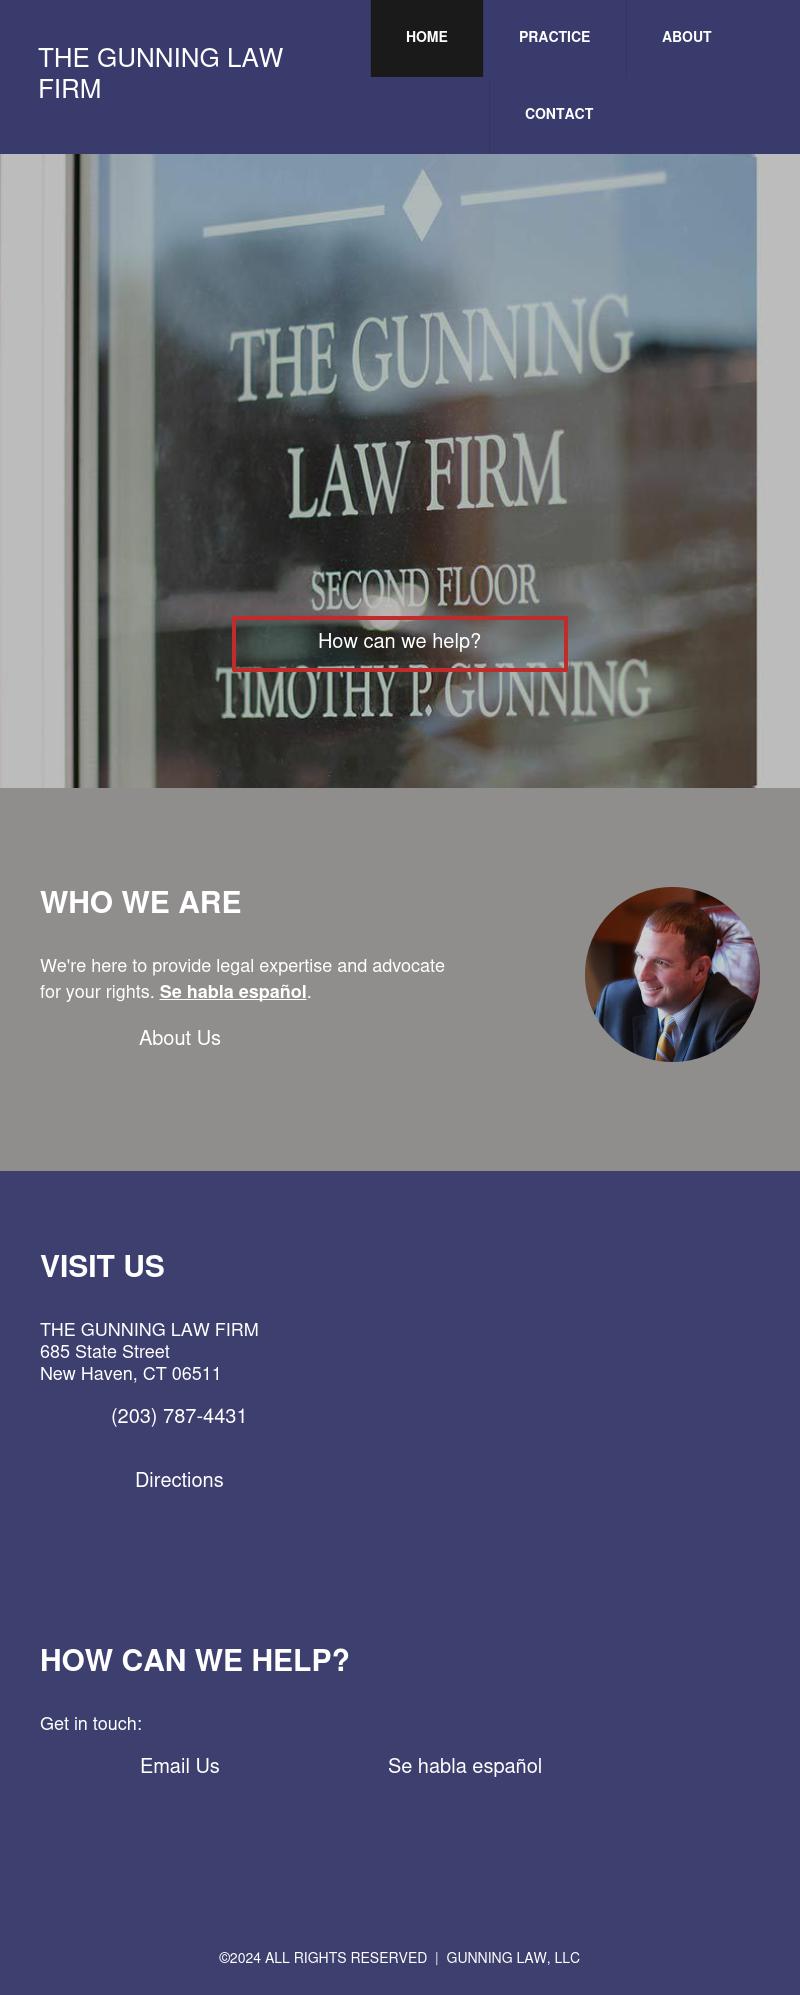 Gunning Law Firm - New Haven CT Lawyers